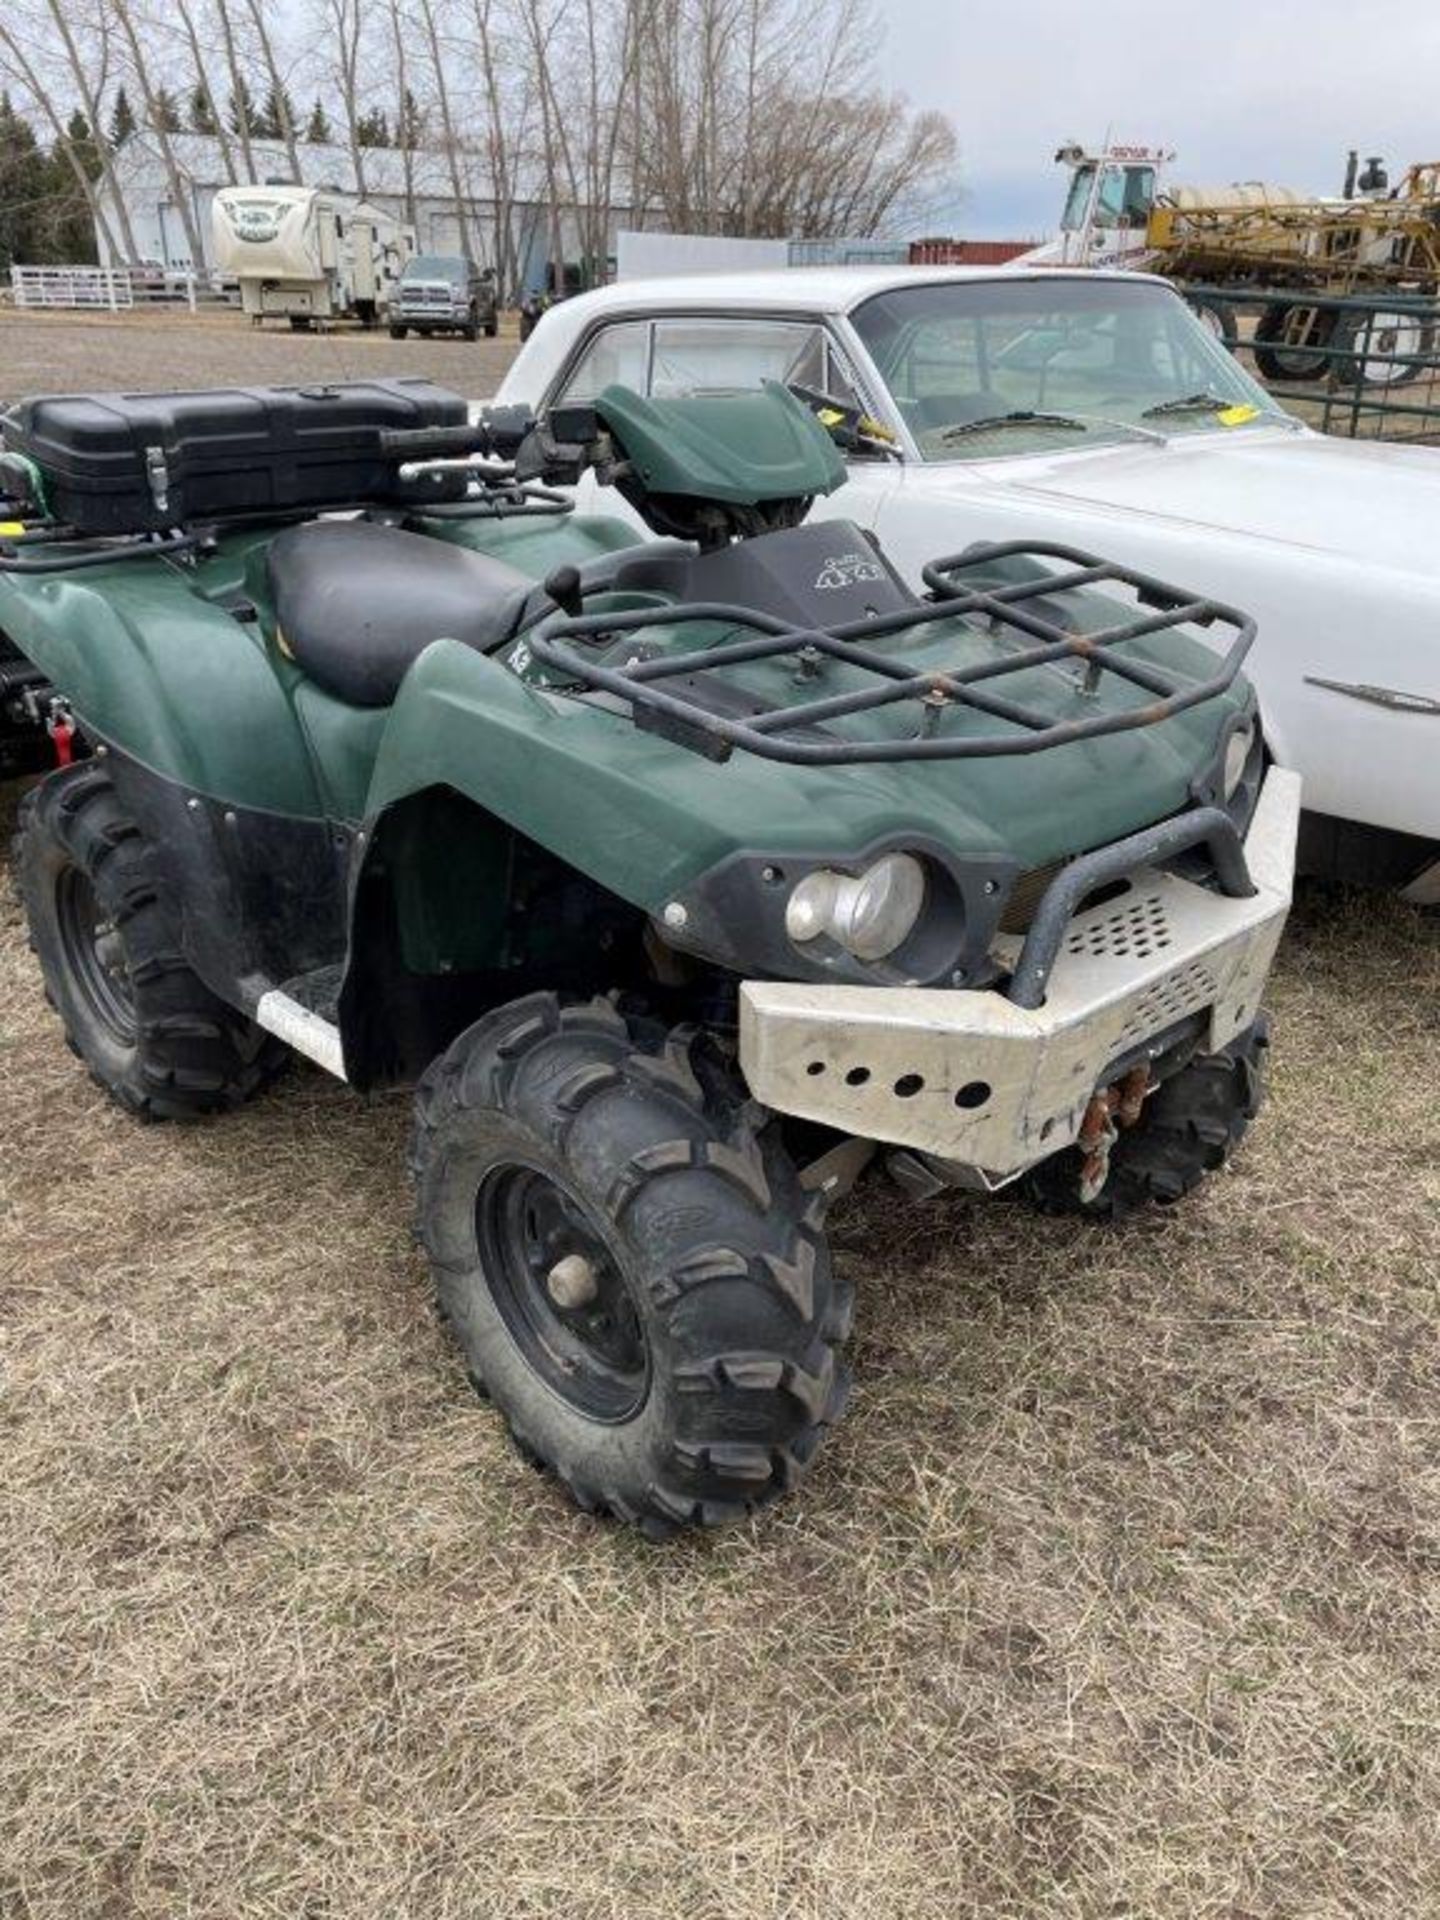 2007 KAWASAKI BRUTE FORCE 750 ATV 4X4 AUTO, RECENT CARB CLEAN, NEW BATTERY, 1762 KM'S SHOWING - Image 14 of 19